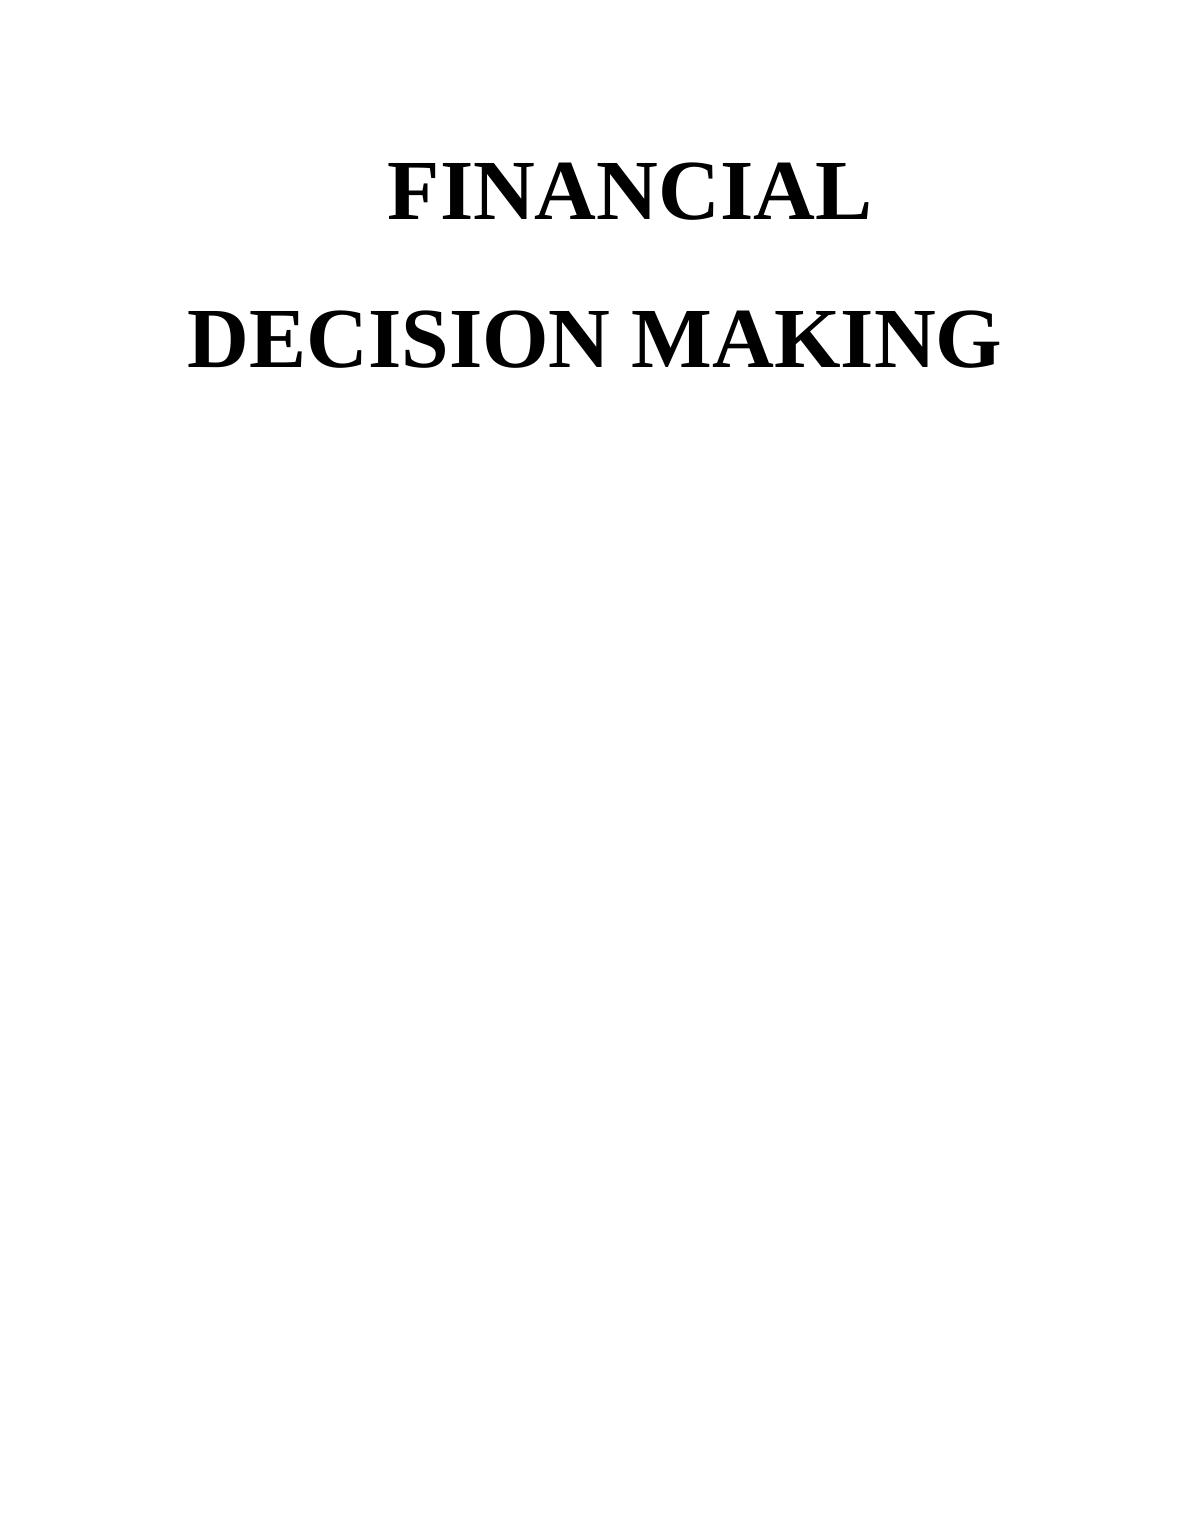 Financial Decision Making_1